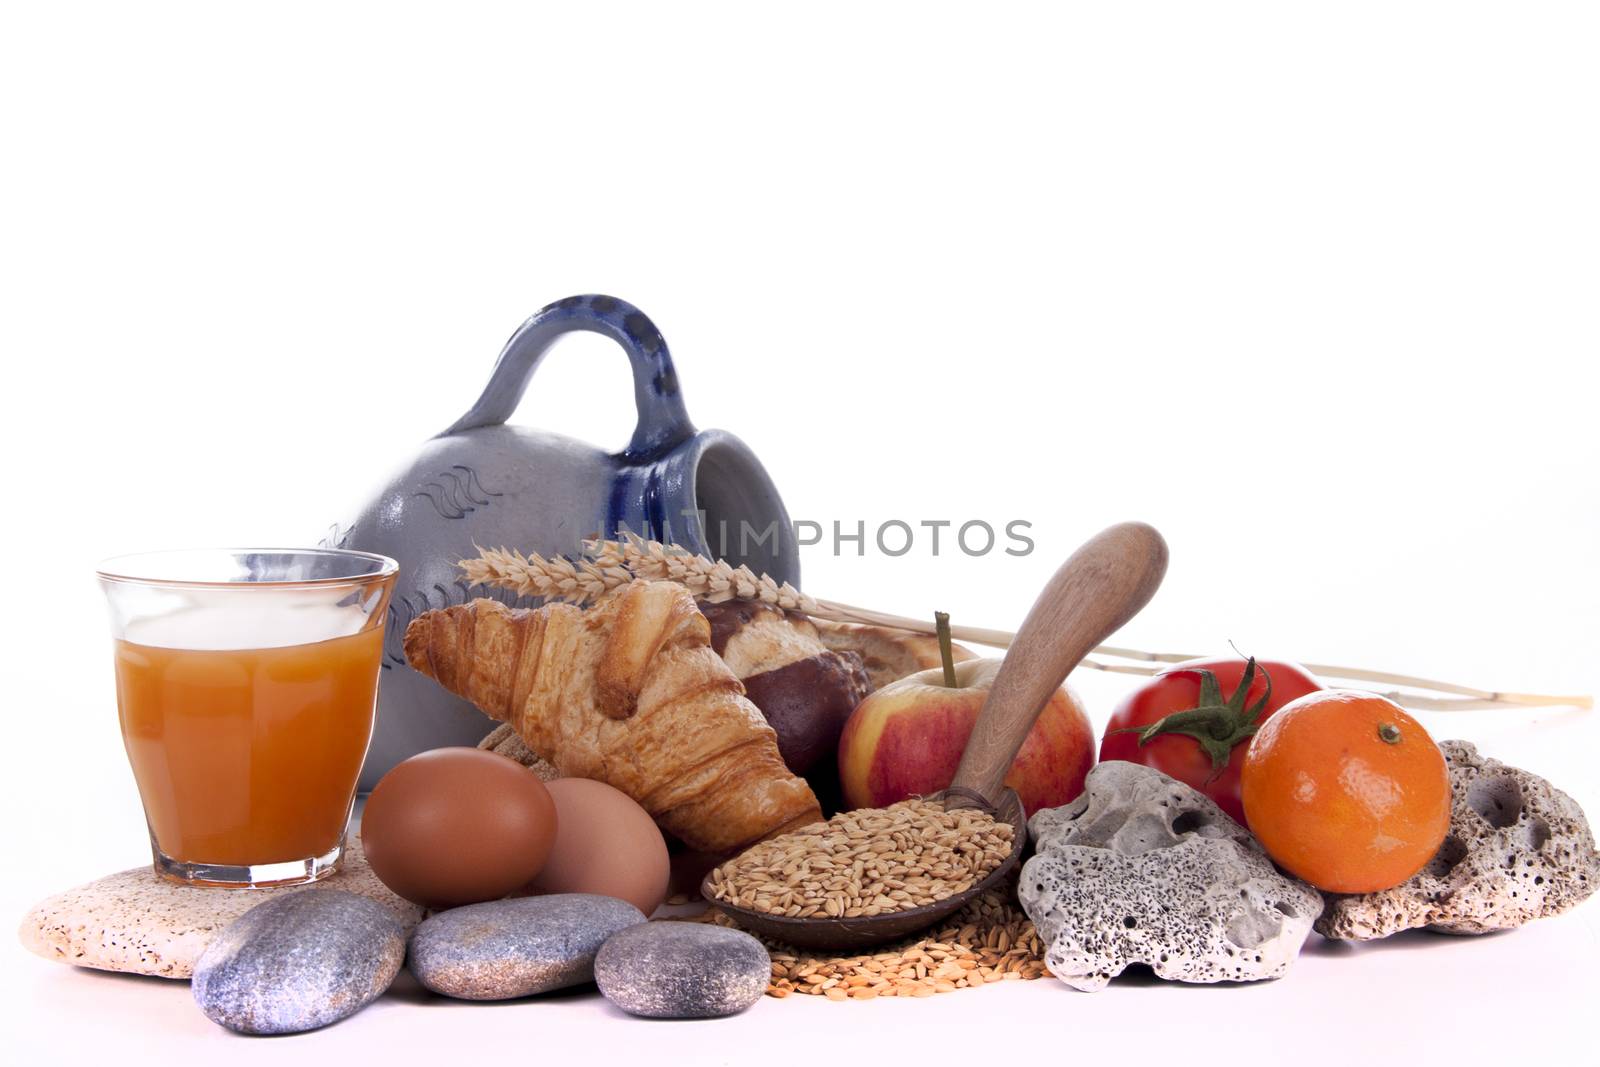 Healty bread and ingedients for breakfast